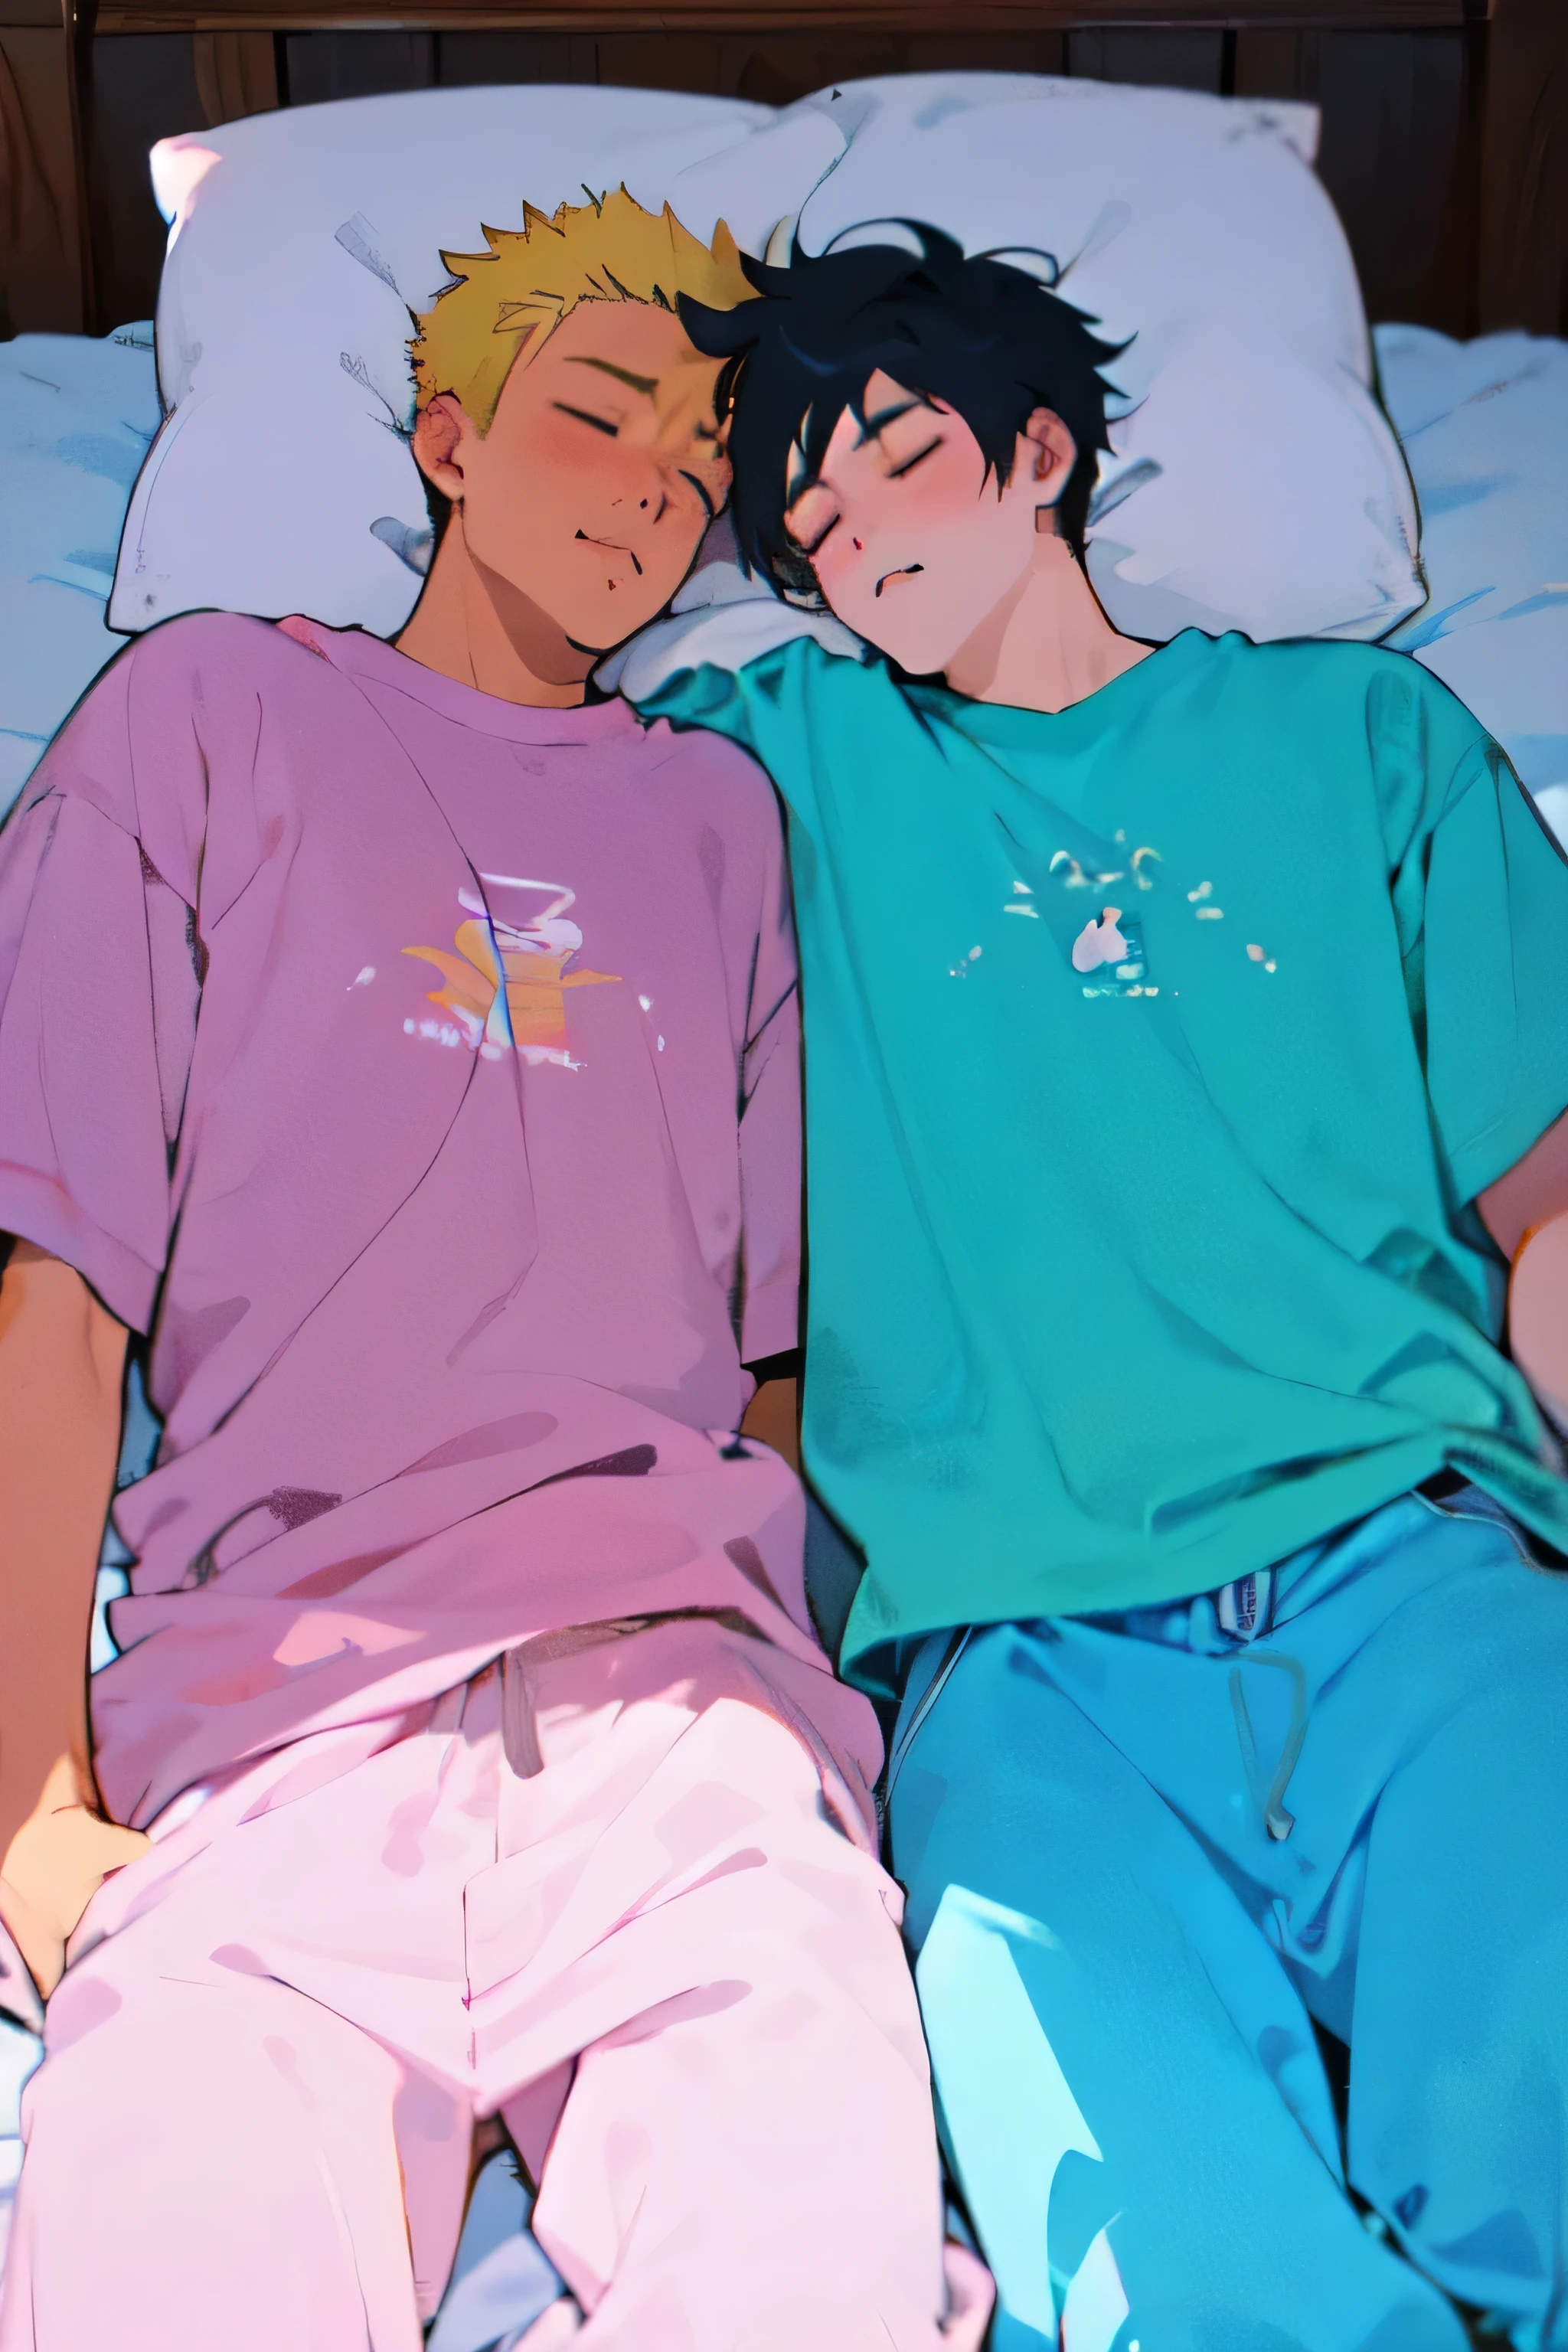 two gay men sleeping in bed, 2000's anime style, vibrant colors
